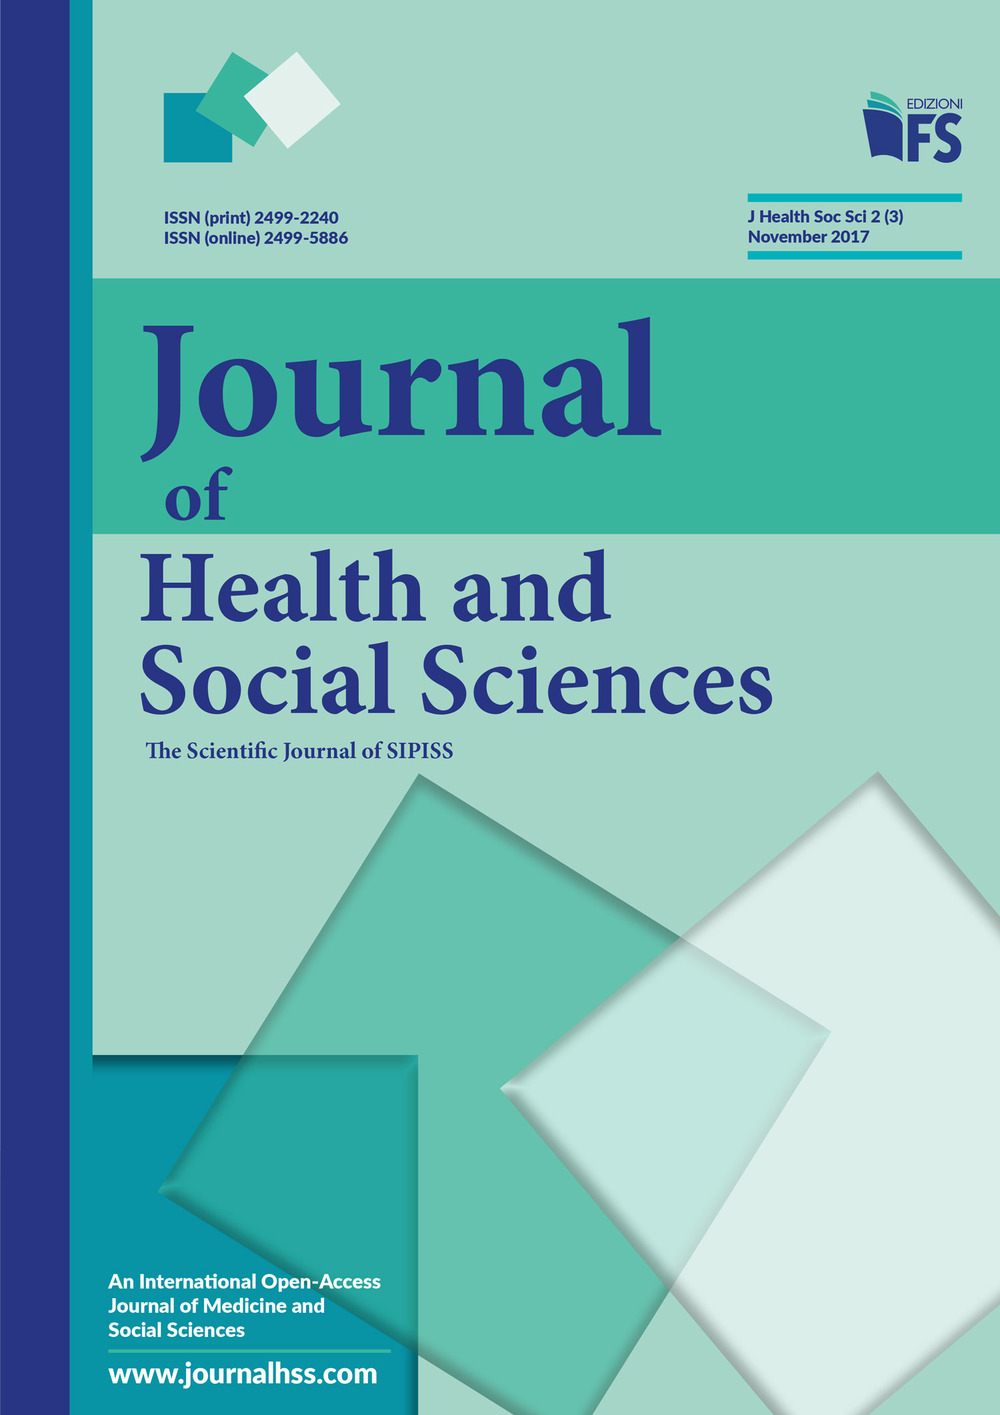 Journal of health and social sciences (2017). Vol. 3: November